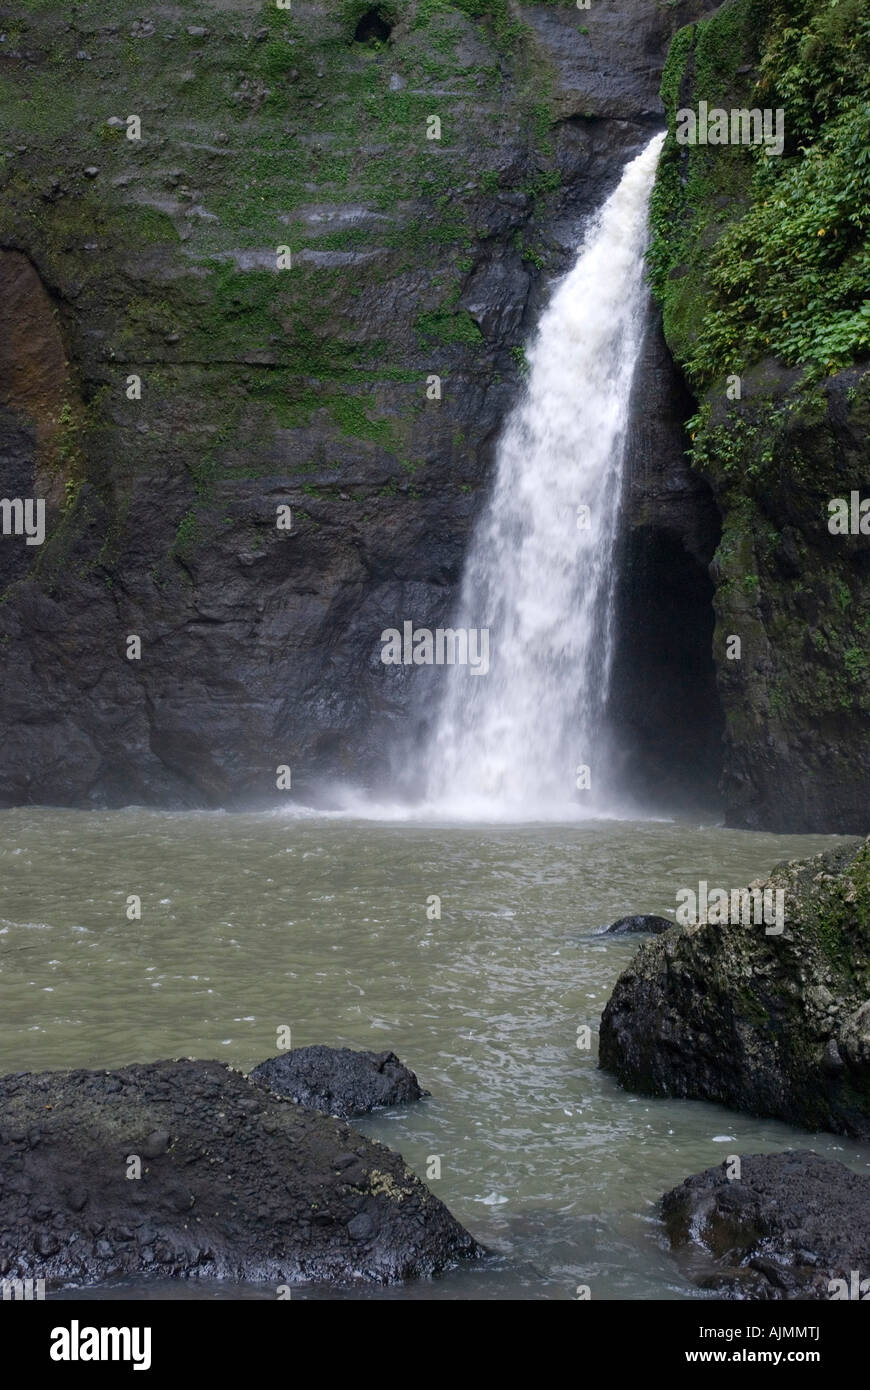 Pagsanjan water fall, a popular tourist destination in Laguna, Southern Luzon, Philippines Stock Photo